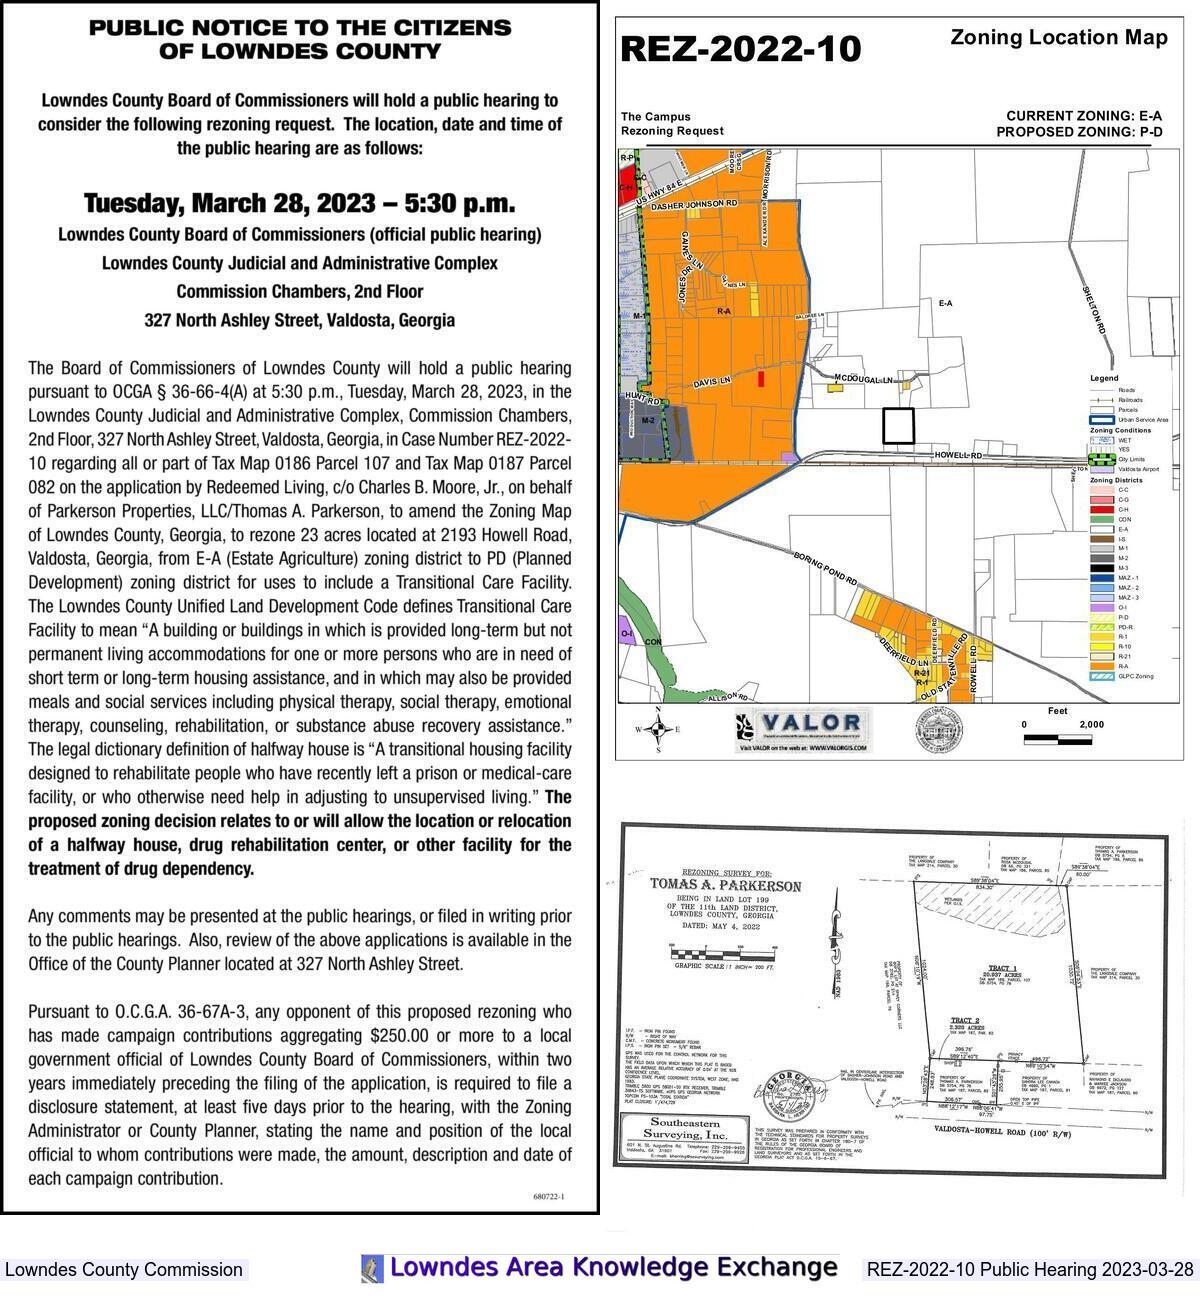 Second Public Re-Hearing, Zoning Location Map